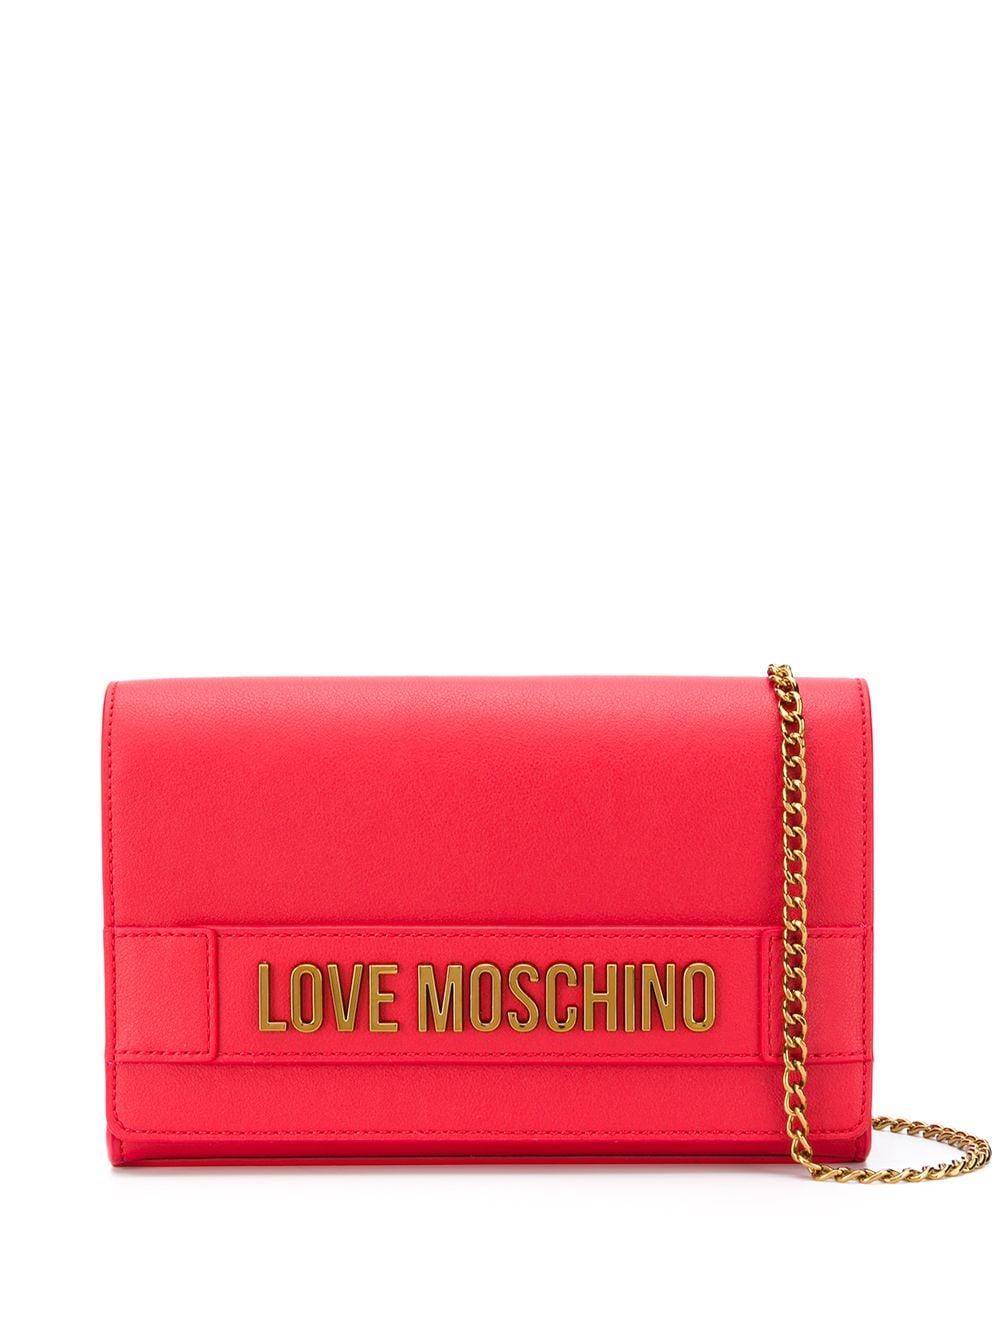 Love Moschino Logo Plaque Crossbody Bag in Red - Lyst